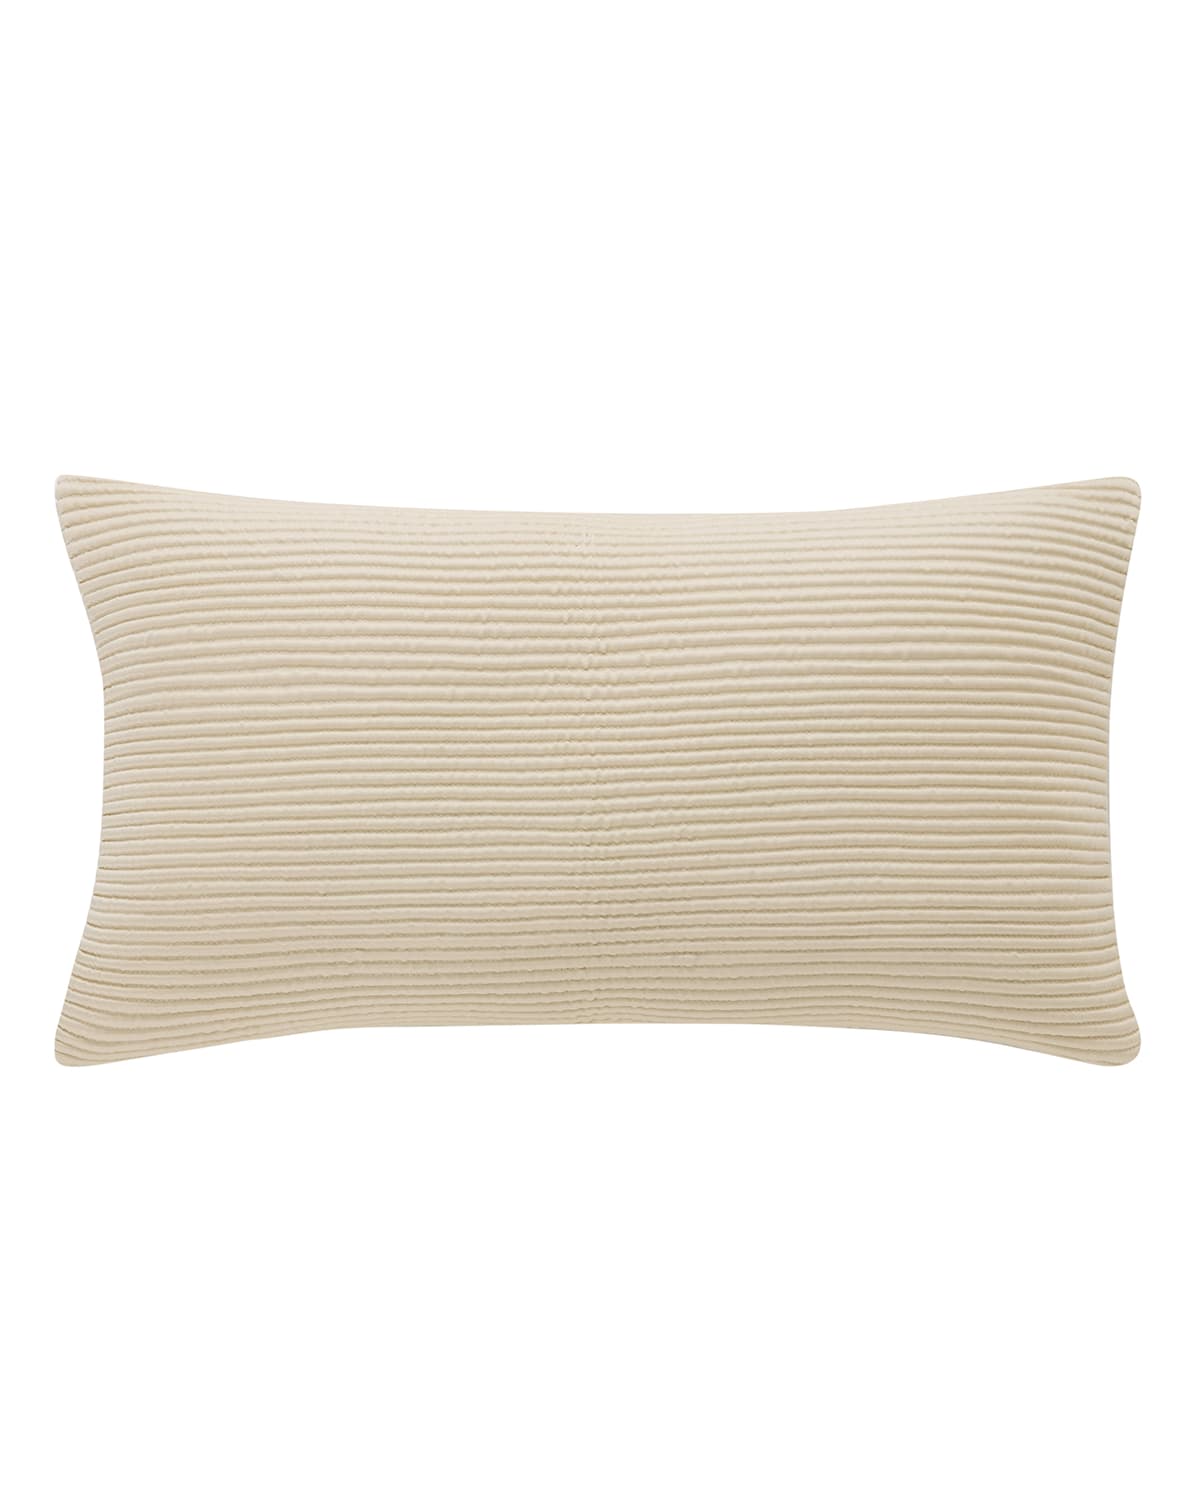 Image Waterford Abrielle Decorative Breakfast Pillow